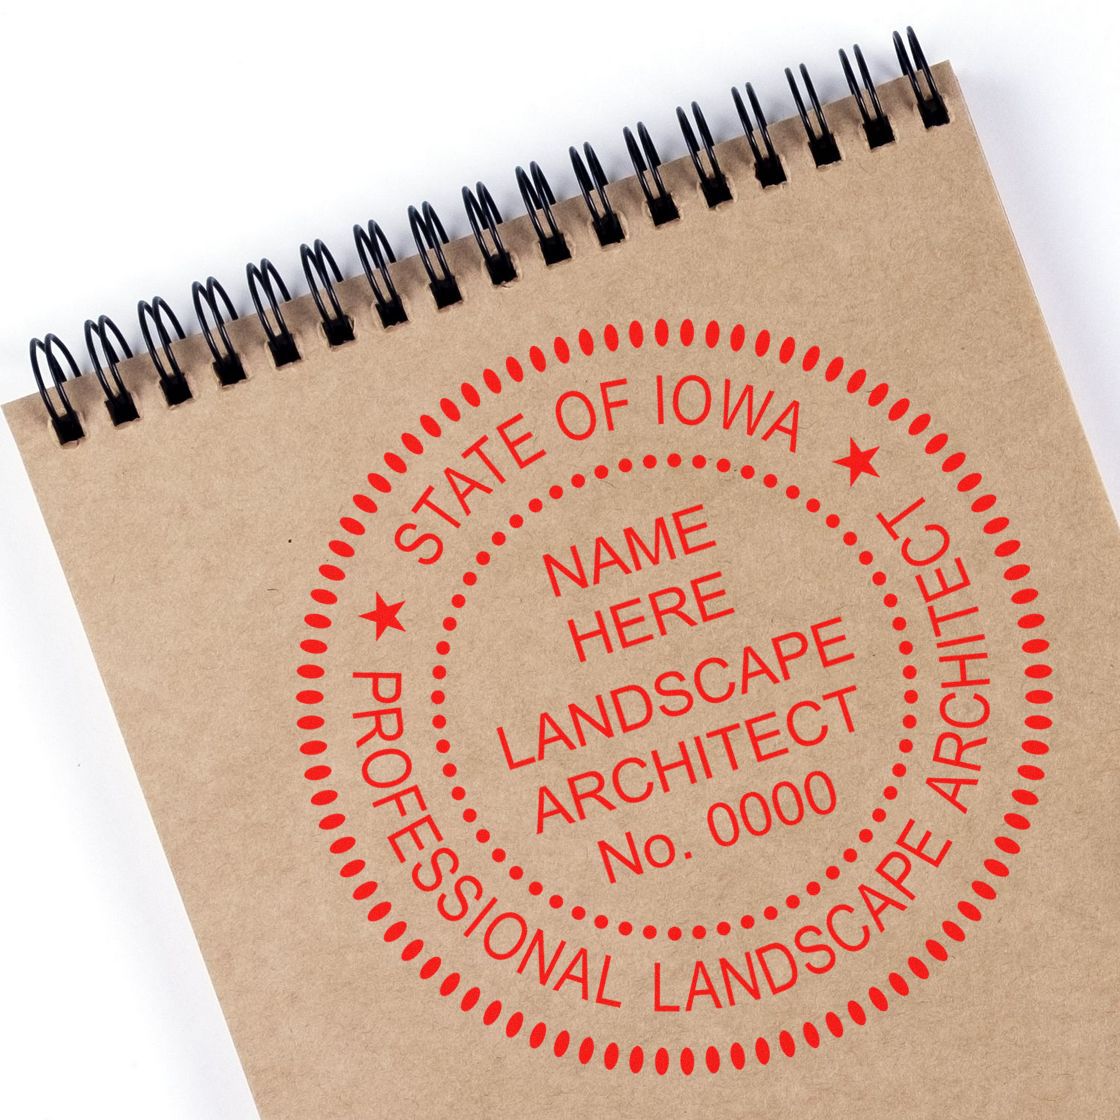 The main image for the Iowa Landscape Architectural Seal Stamp depicting a sample of the imprint and electronic files